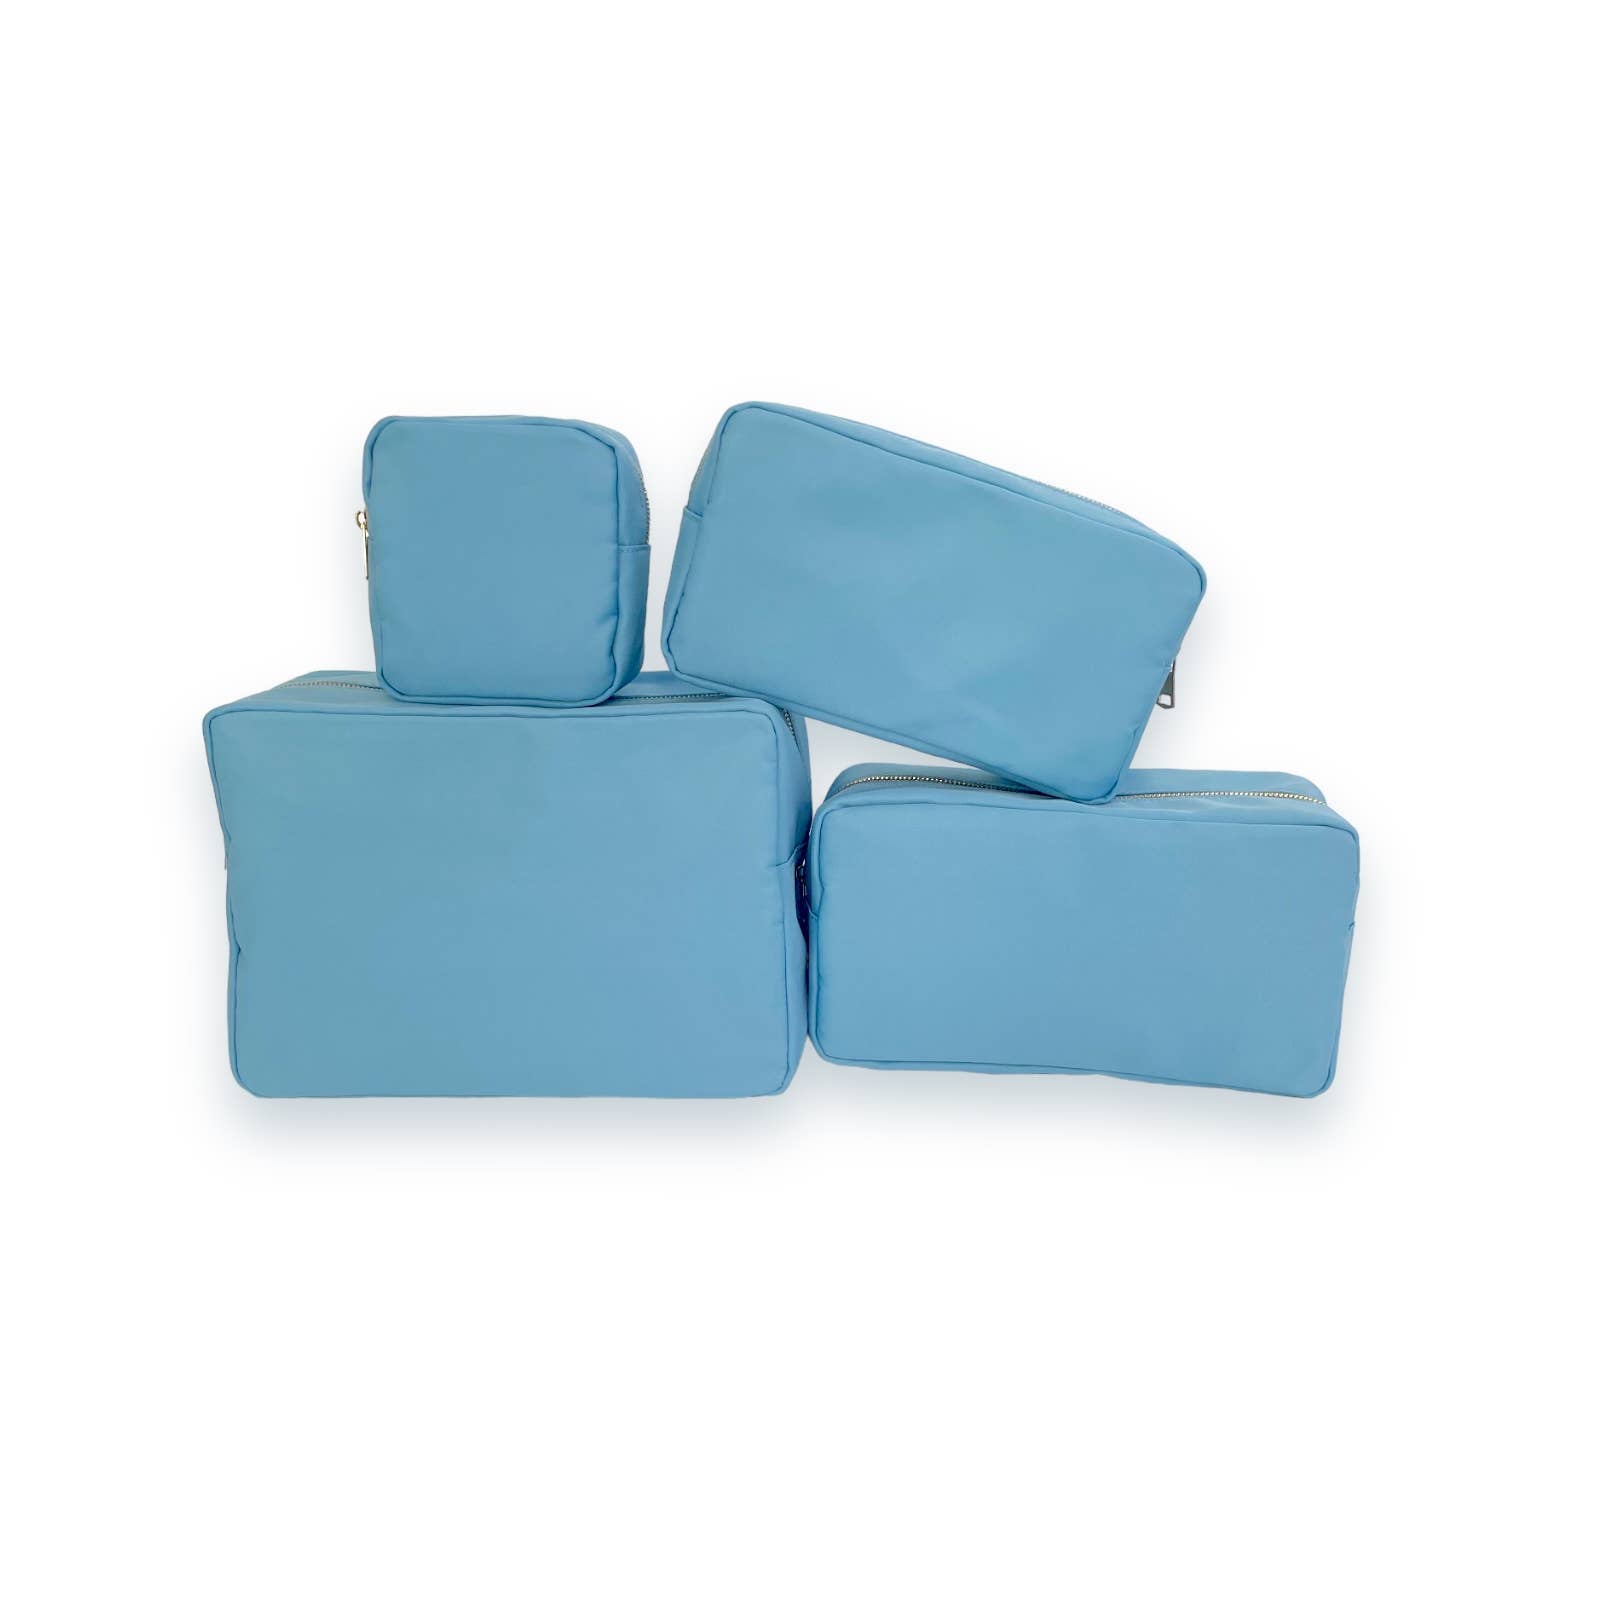 Nylon Pouch Cosmetic Bags